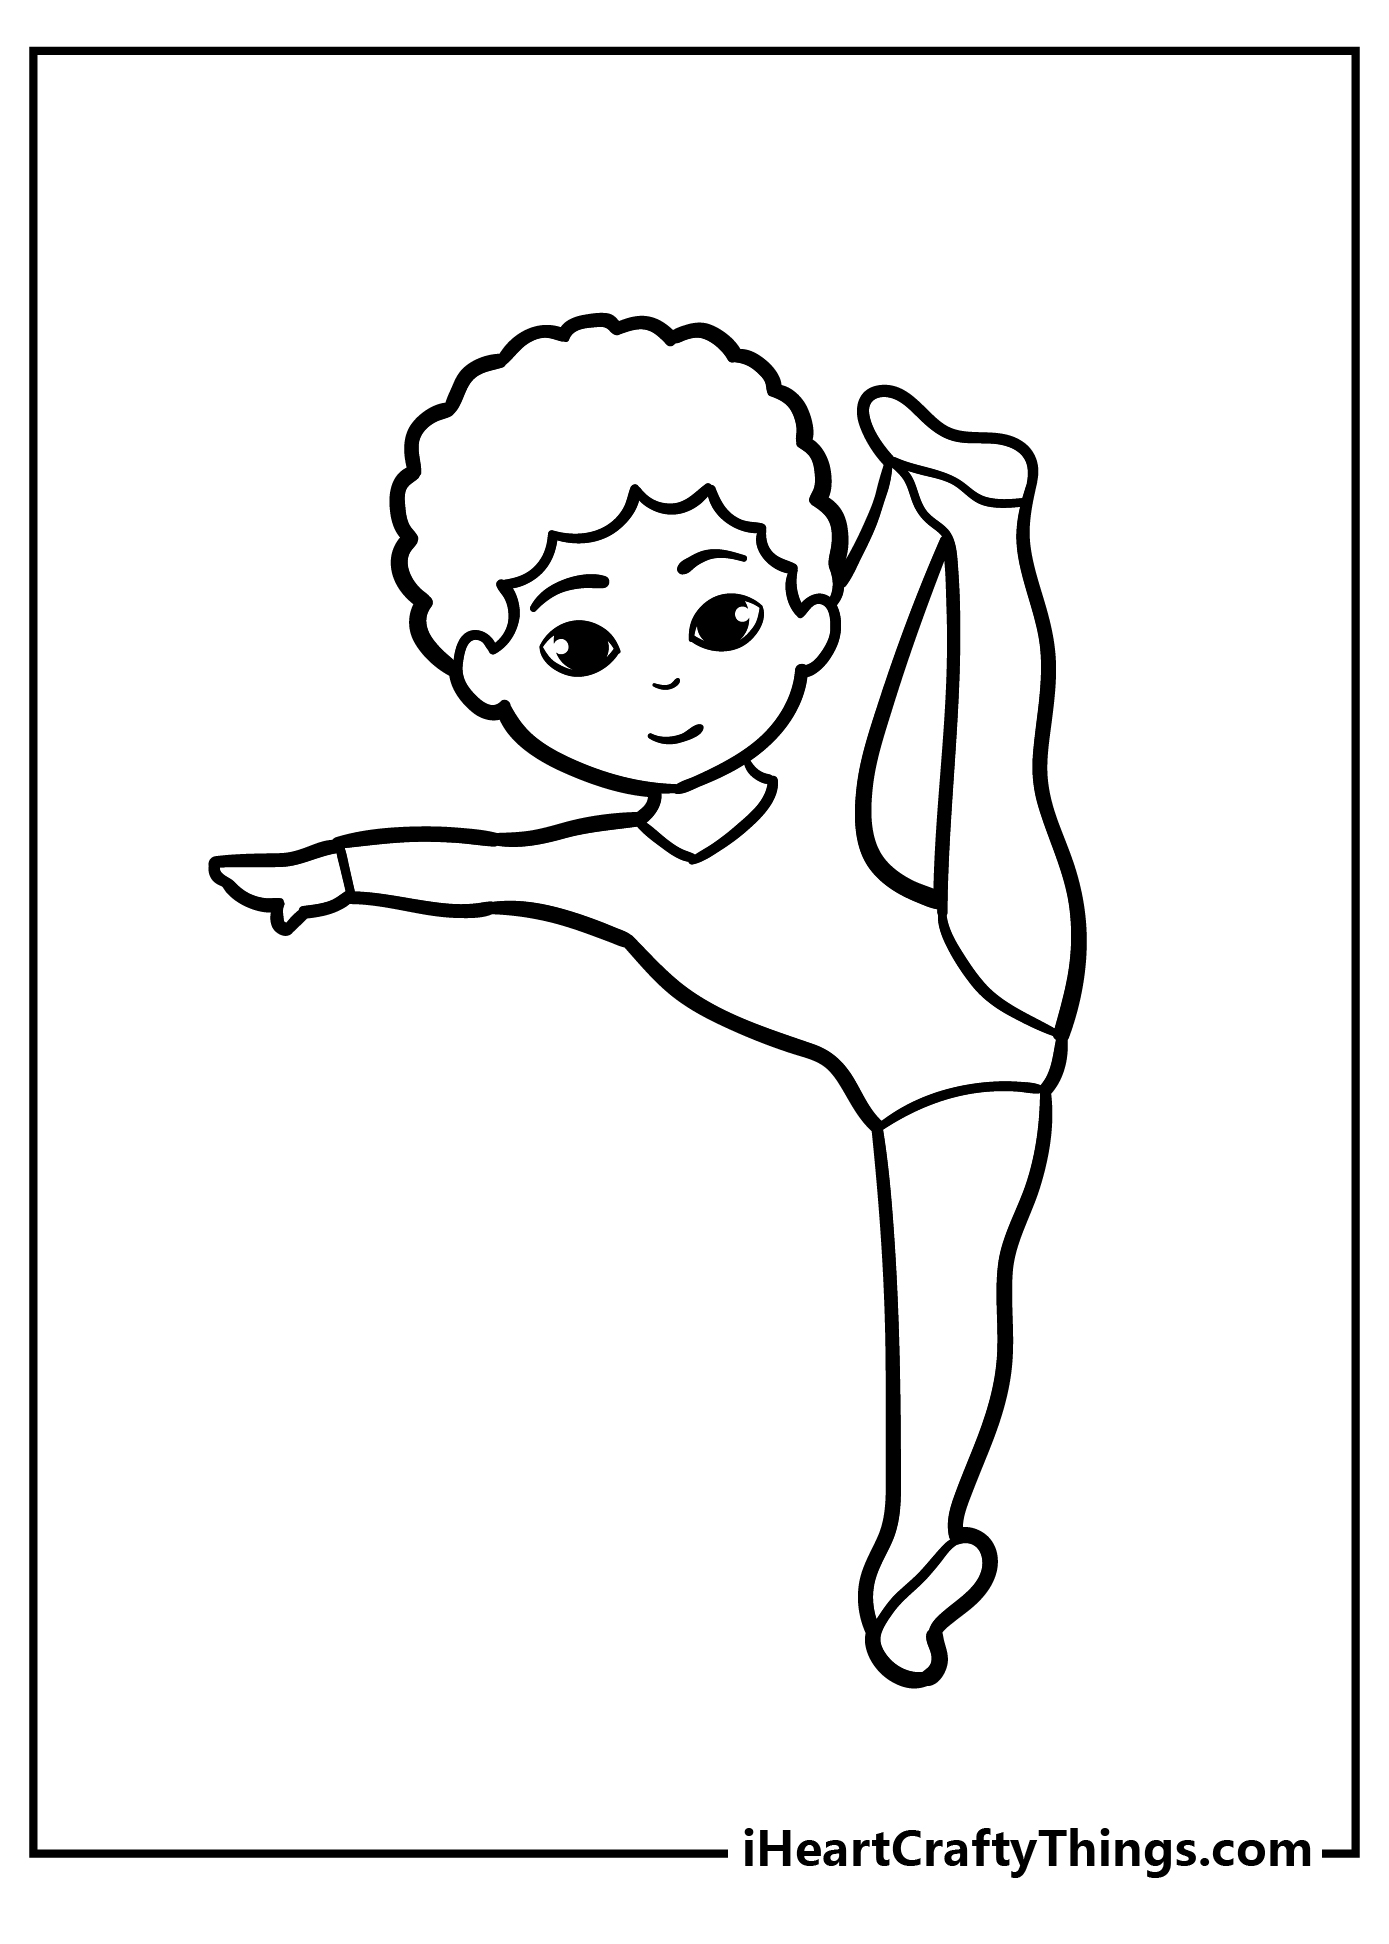 Gymnastics Coloring Pages free pdf download